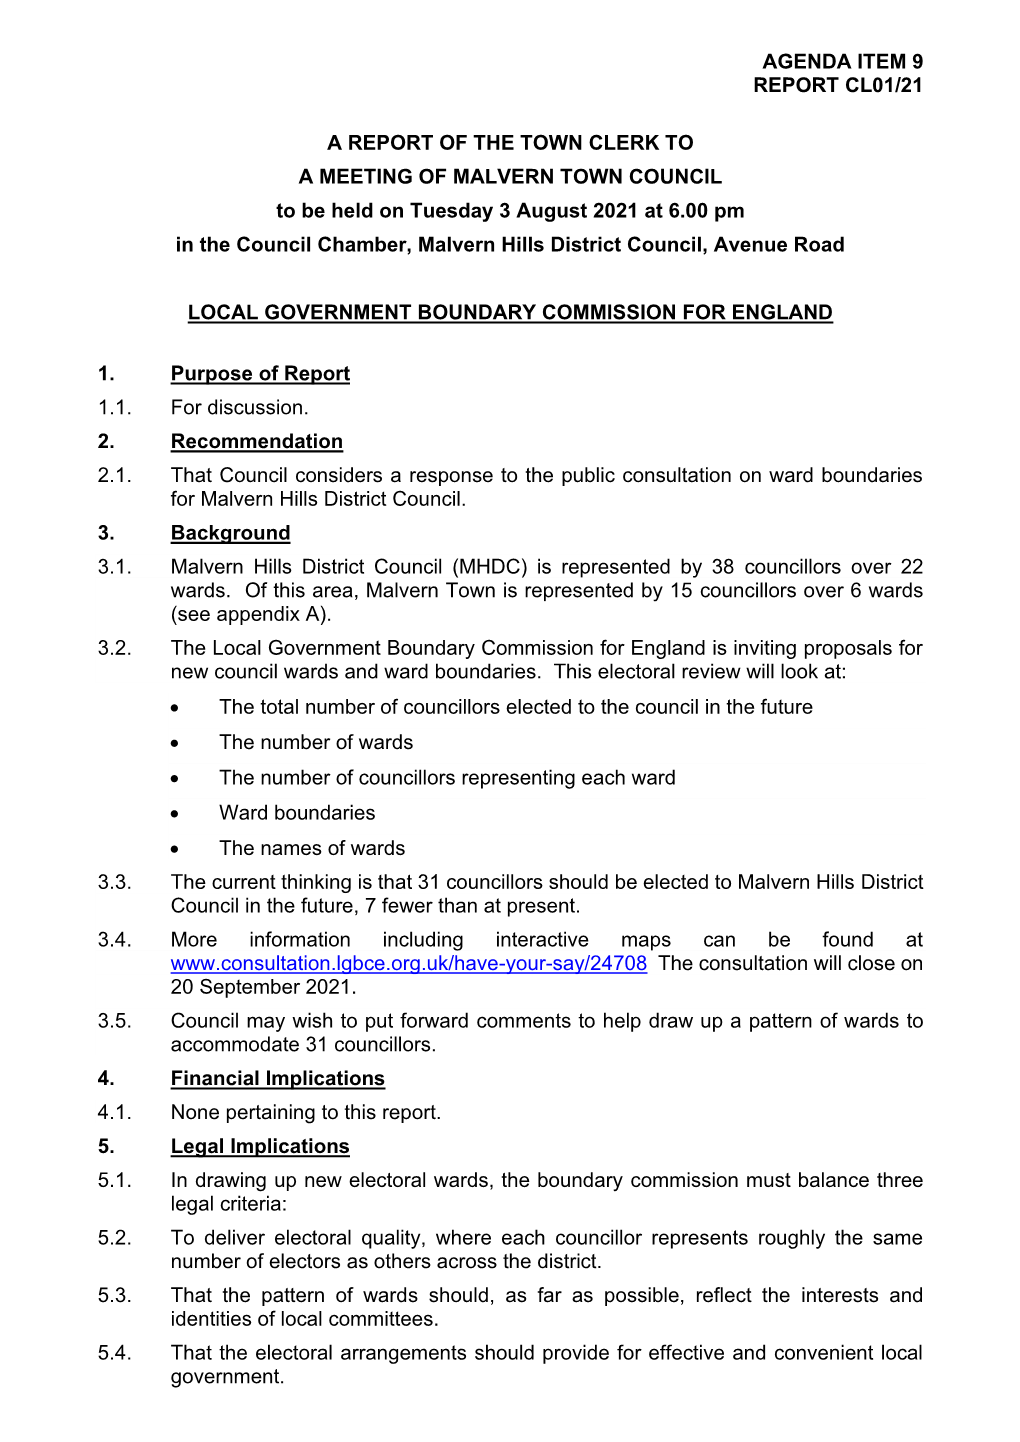 AGENDA ITEM 9 REPORT CL01/21 a REPORT of the TOWN CLERK to a MEETING of MALVERN TOWN COUNCIL to Be Held on Tuesday 3 August 2021